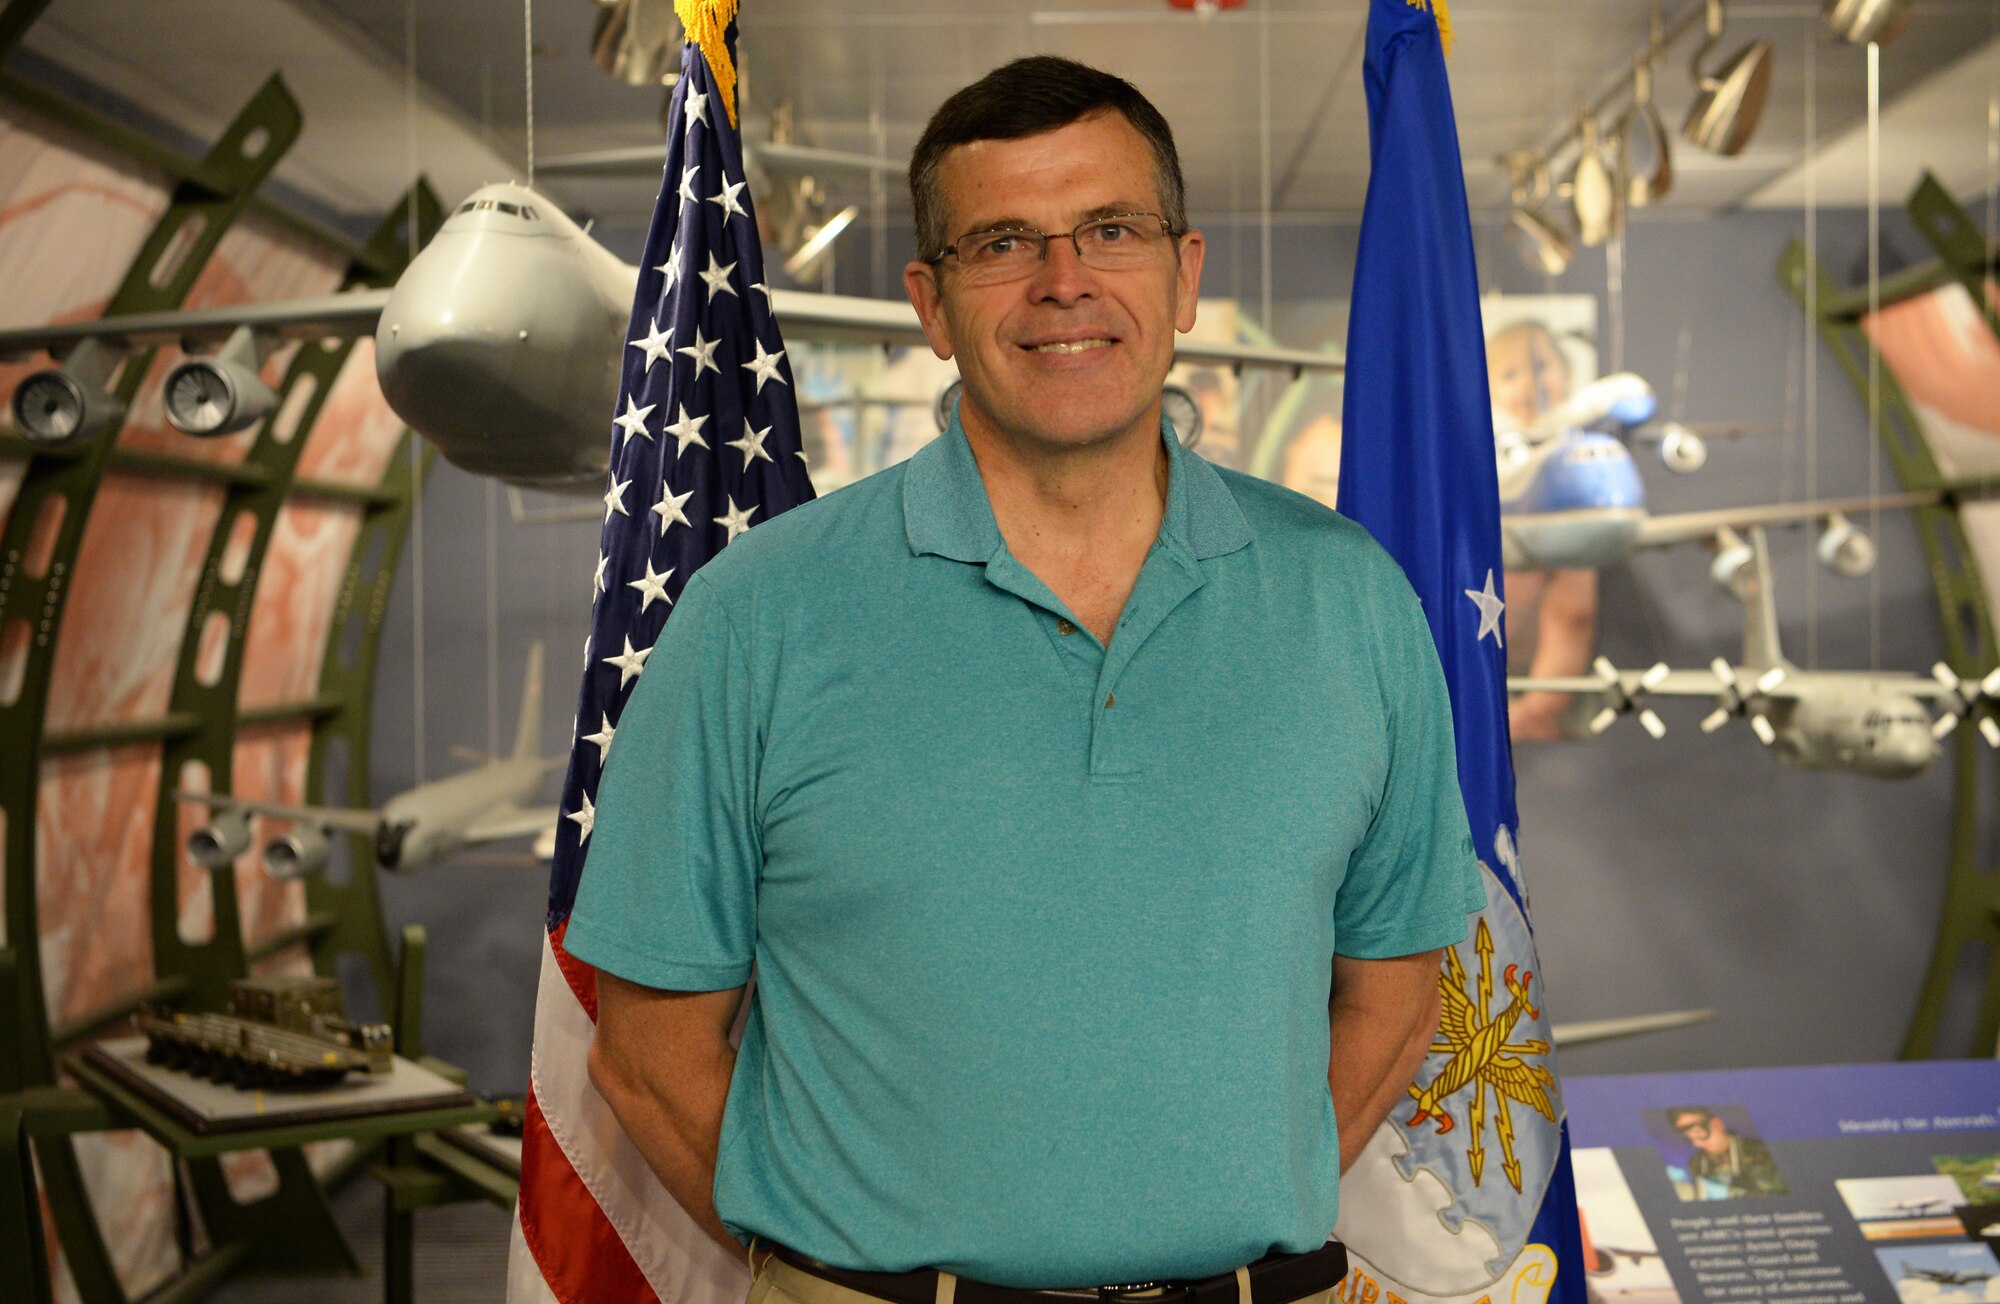 David Young, 60, Air Mobility Command current operations air mobility analyst and retired Air Force pilot, proudly stands by a model of a C-5 Galaxy at Scott Air Force Base, Ill., April 30, 2019. Young used to fly the aircraft when he was a pilot, and he helped build the display back when it was first installed. In his free time, Young volunteers in the Neonatal Intensive Care Unit at Mercy Hospital in St. Louis. (U.S. Air Force photo by Airman 1st Class Miranda Simpson)